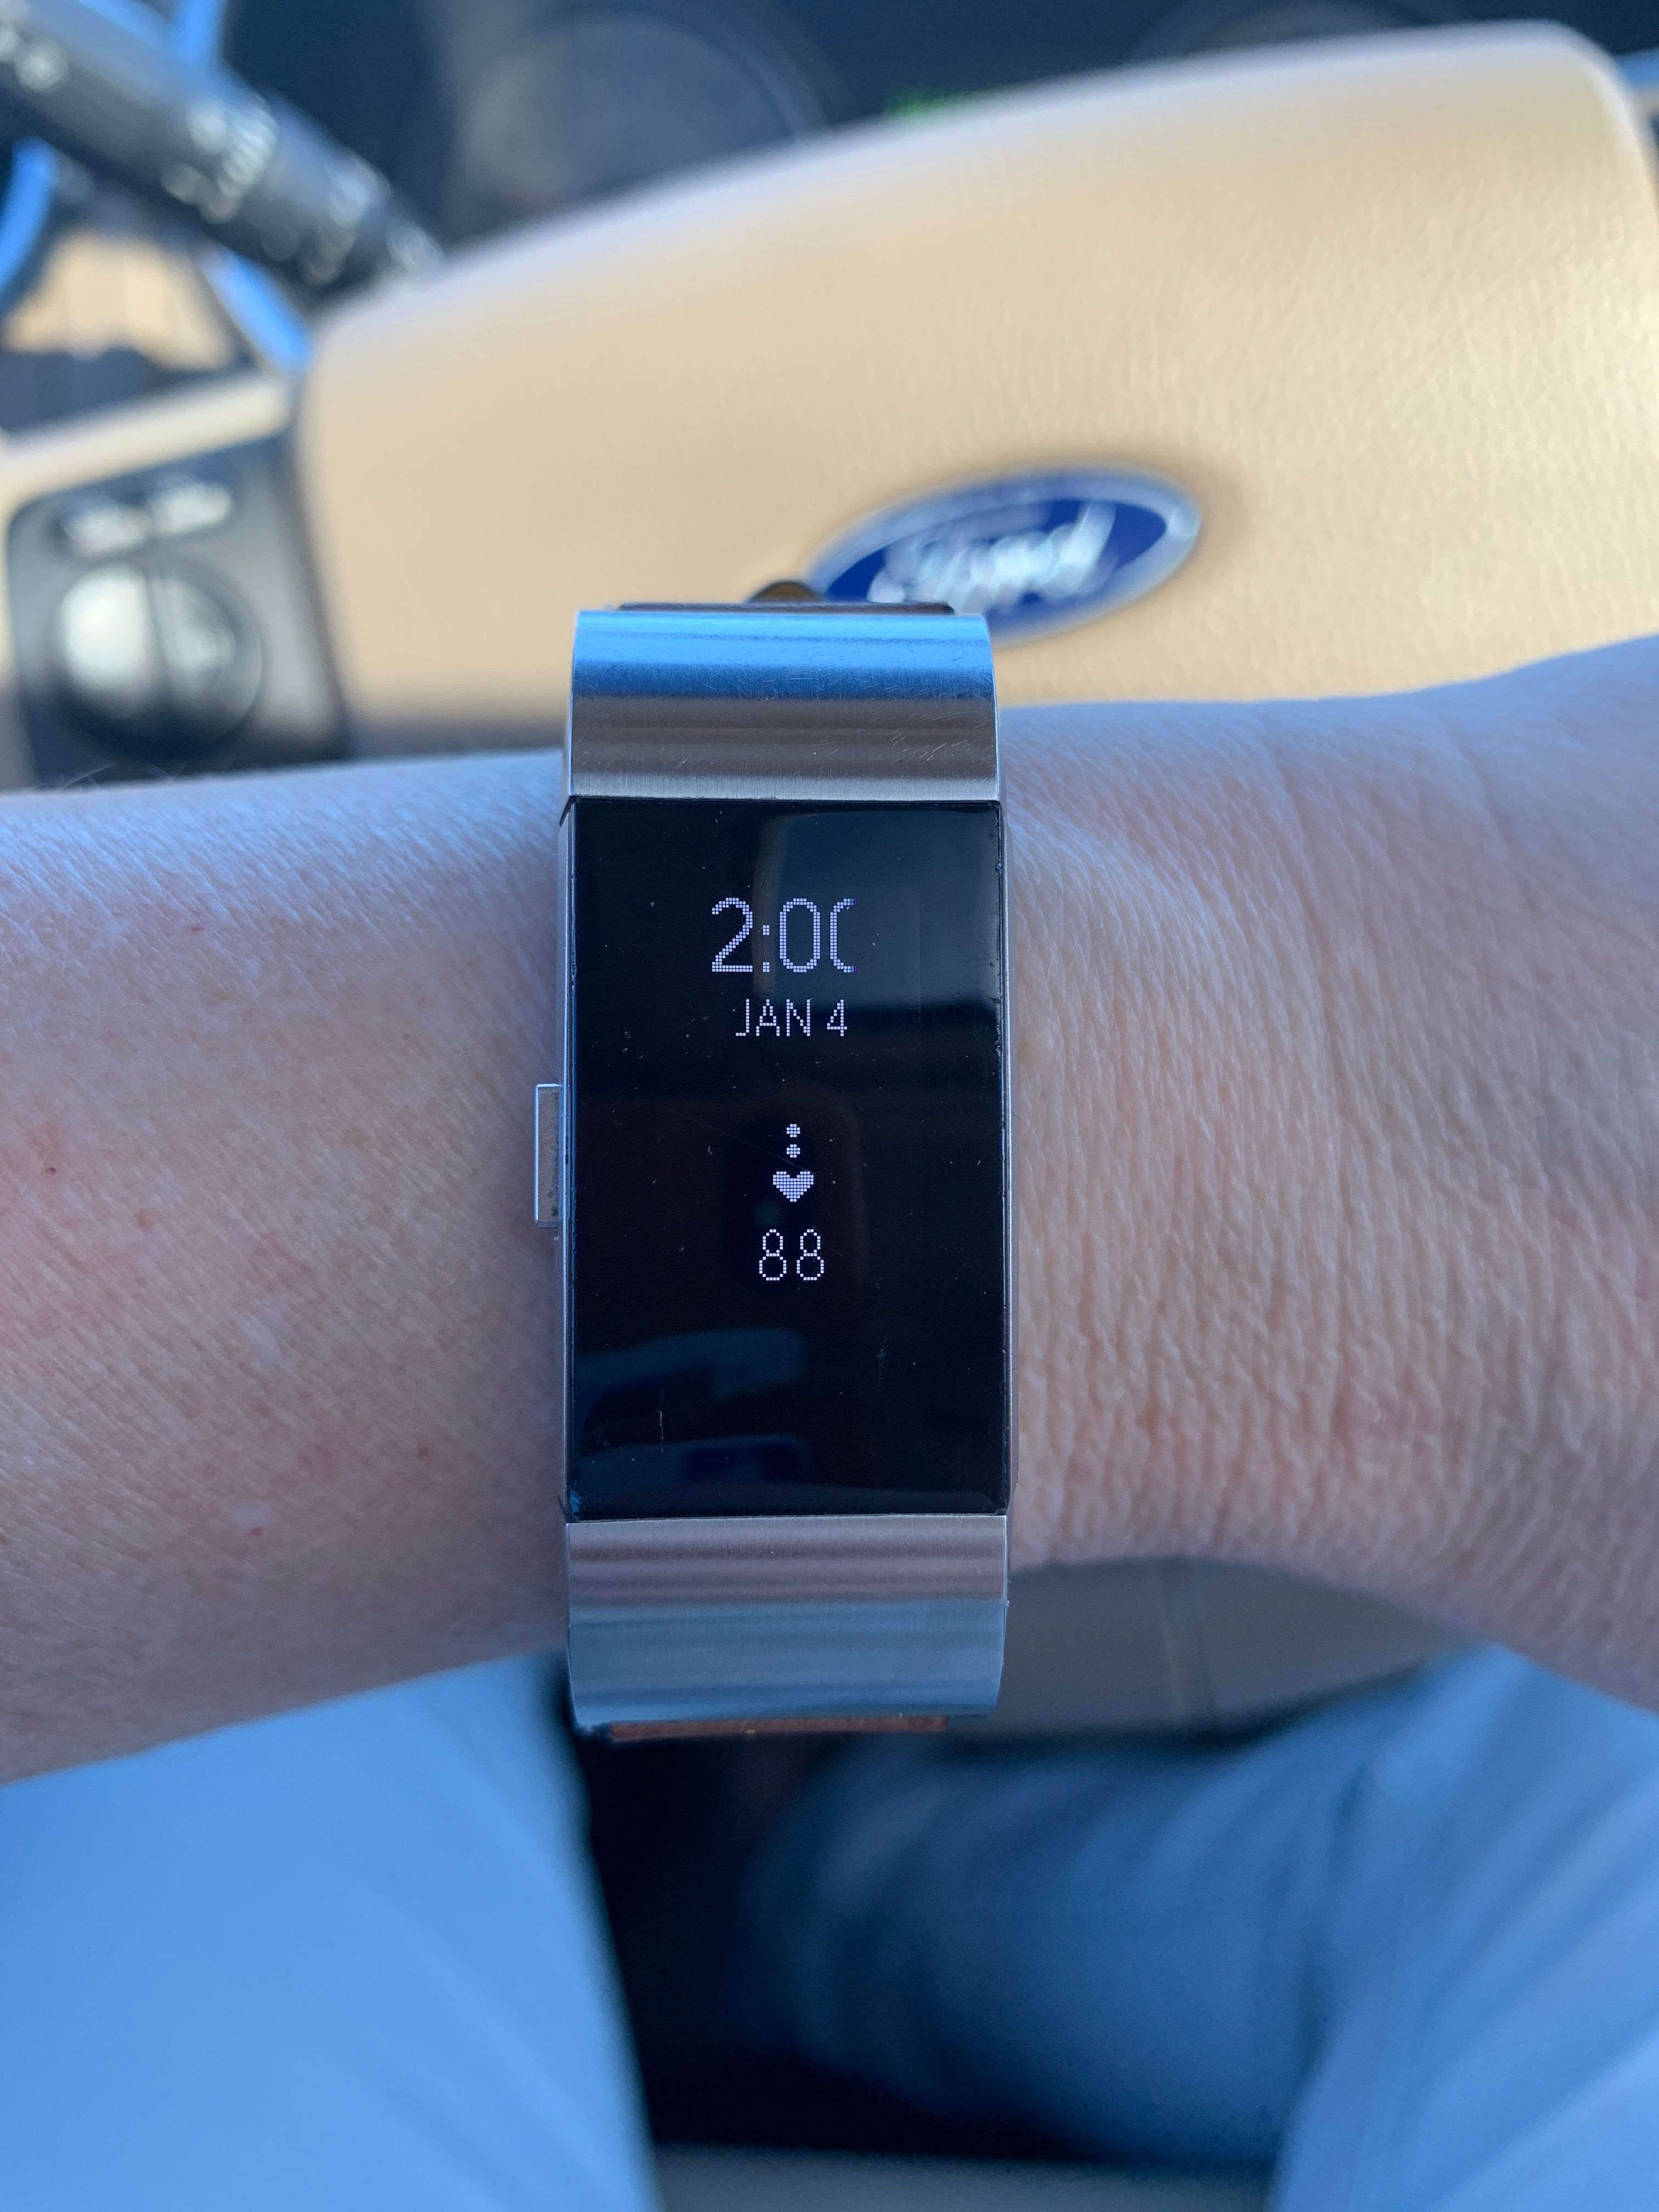 can i change the clock face on my fitbit charge 3